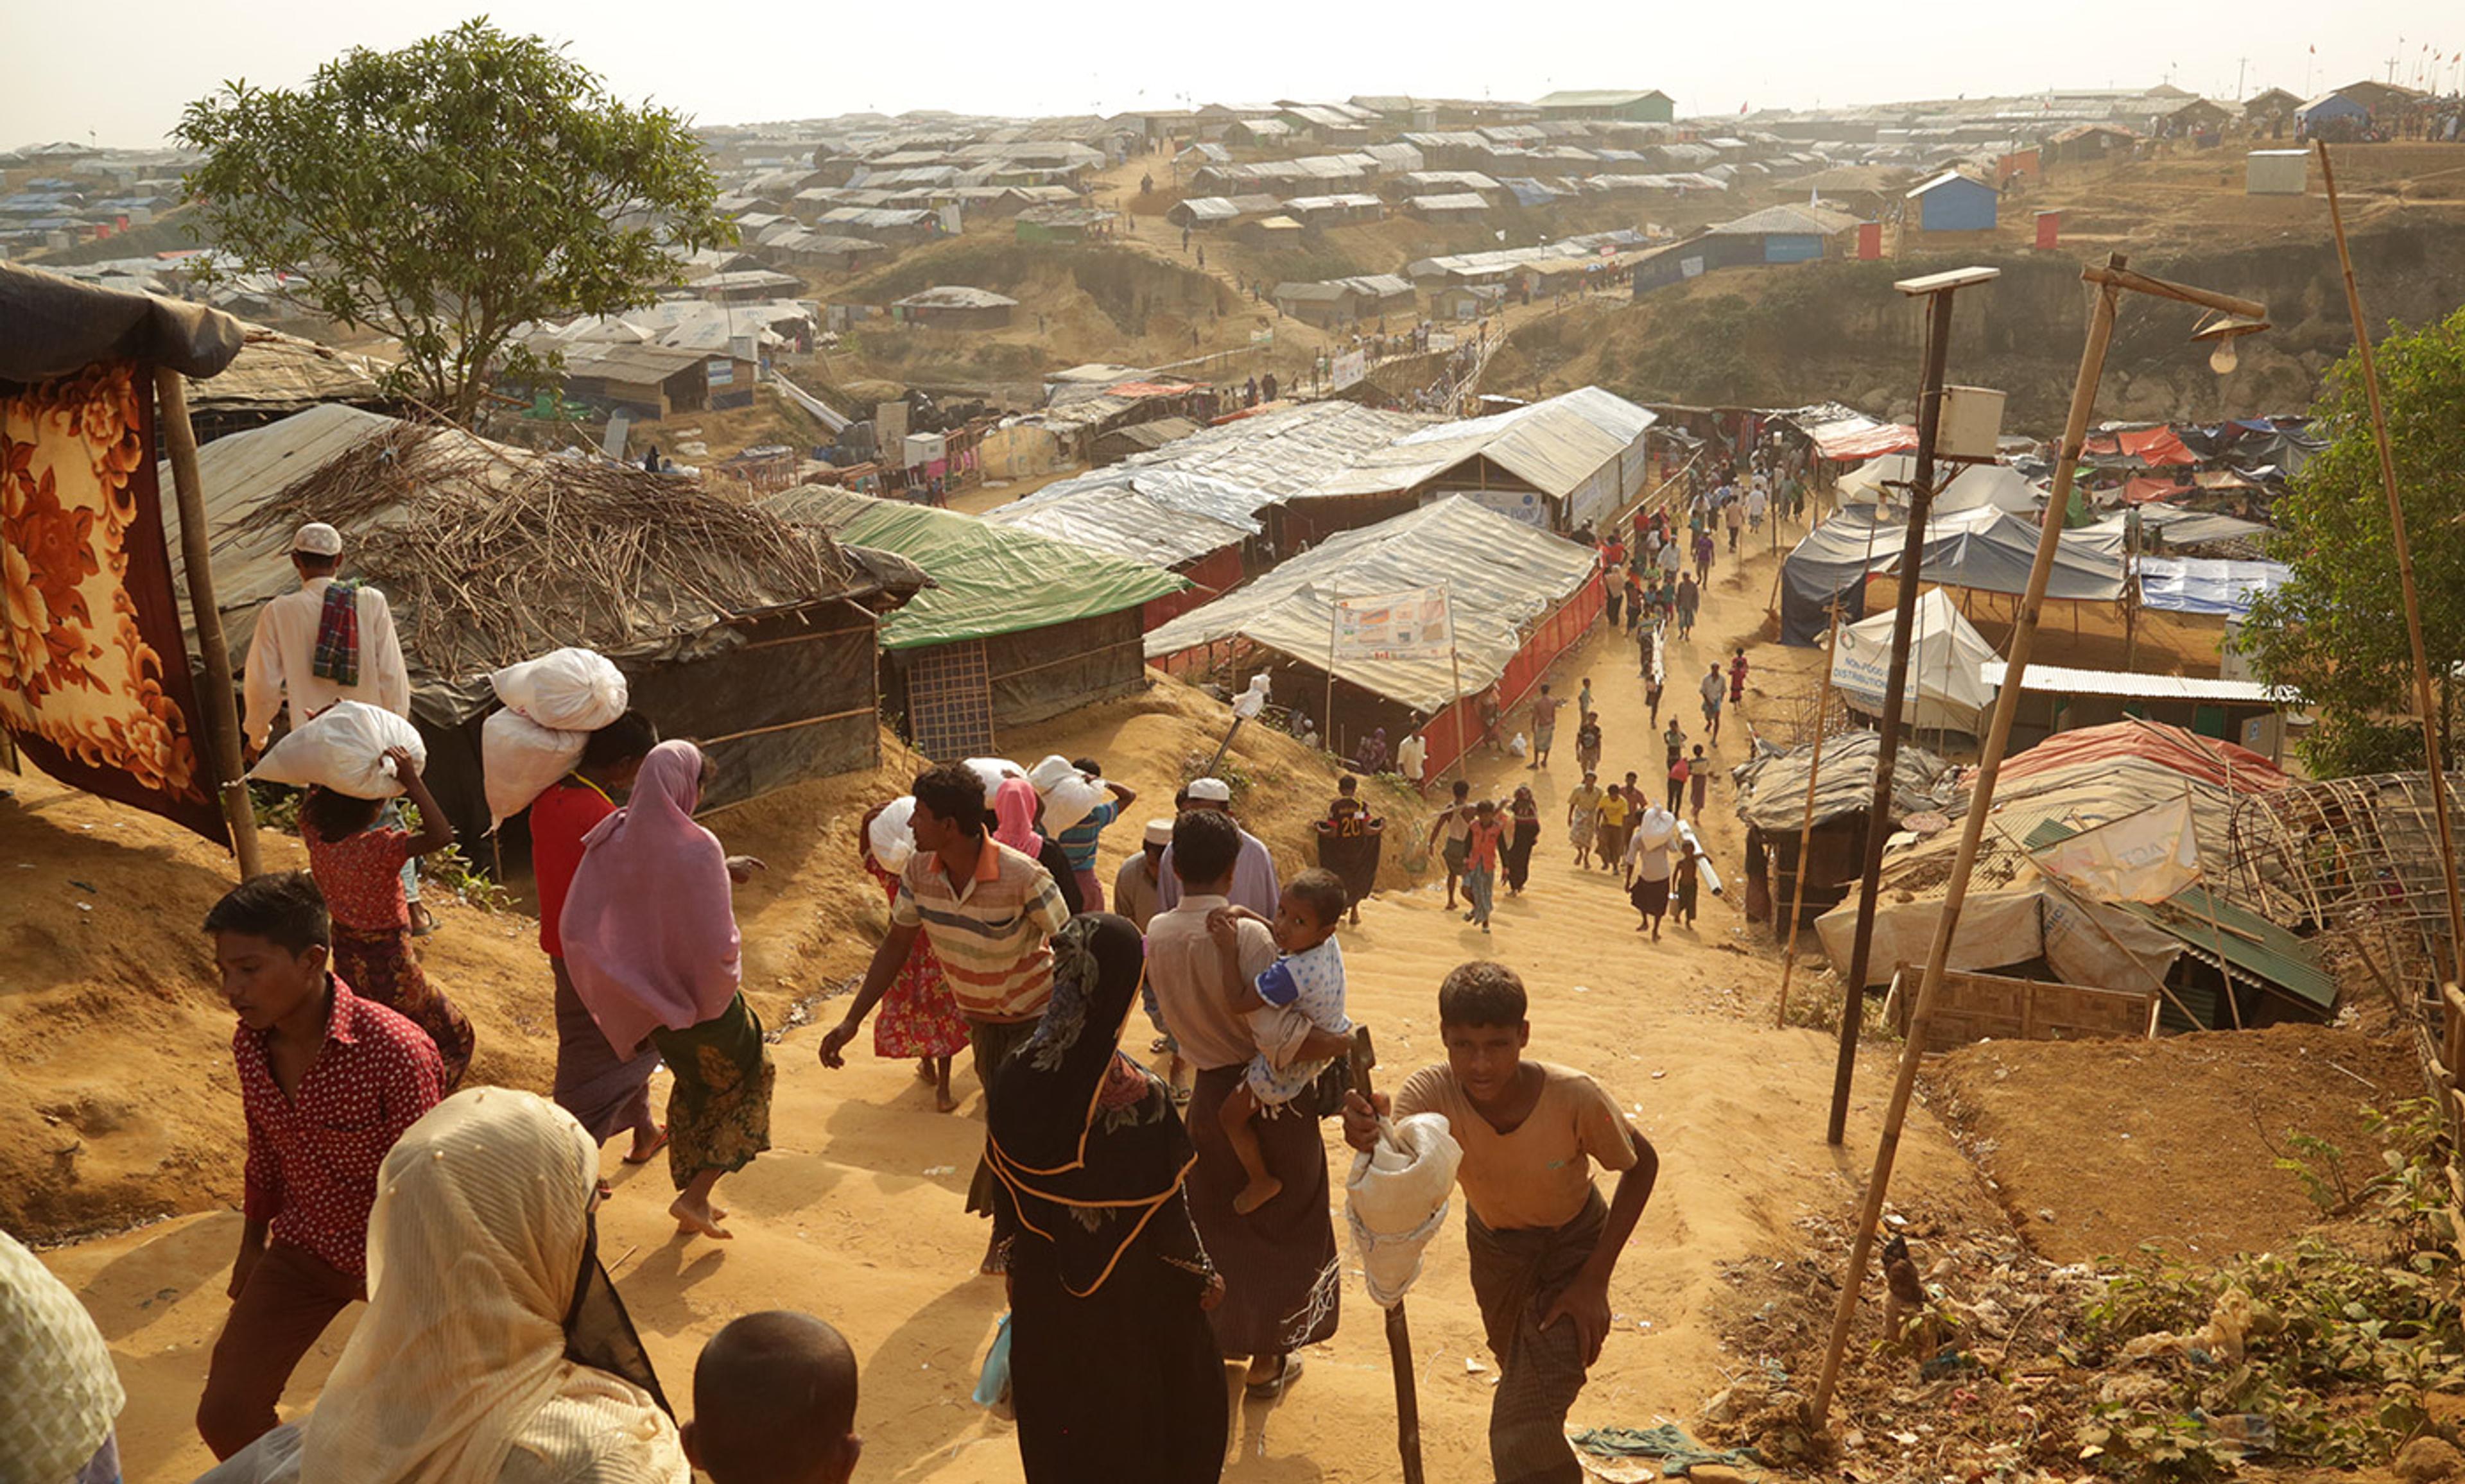 <p>Kutupalong refugee camp, near Cox’s Bazar, Bangladesh. The Rohingya people, fleeing violence, have been arriving here since 25 August 2017. <em>Photo by DFID/Flickr</em></p>